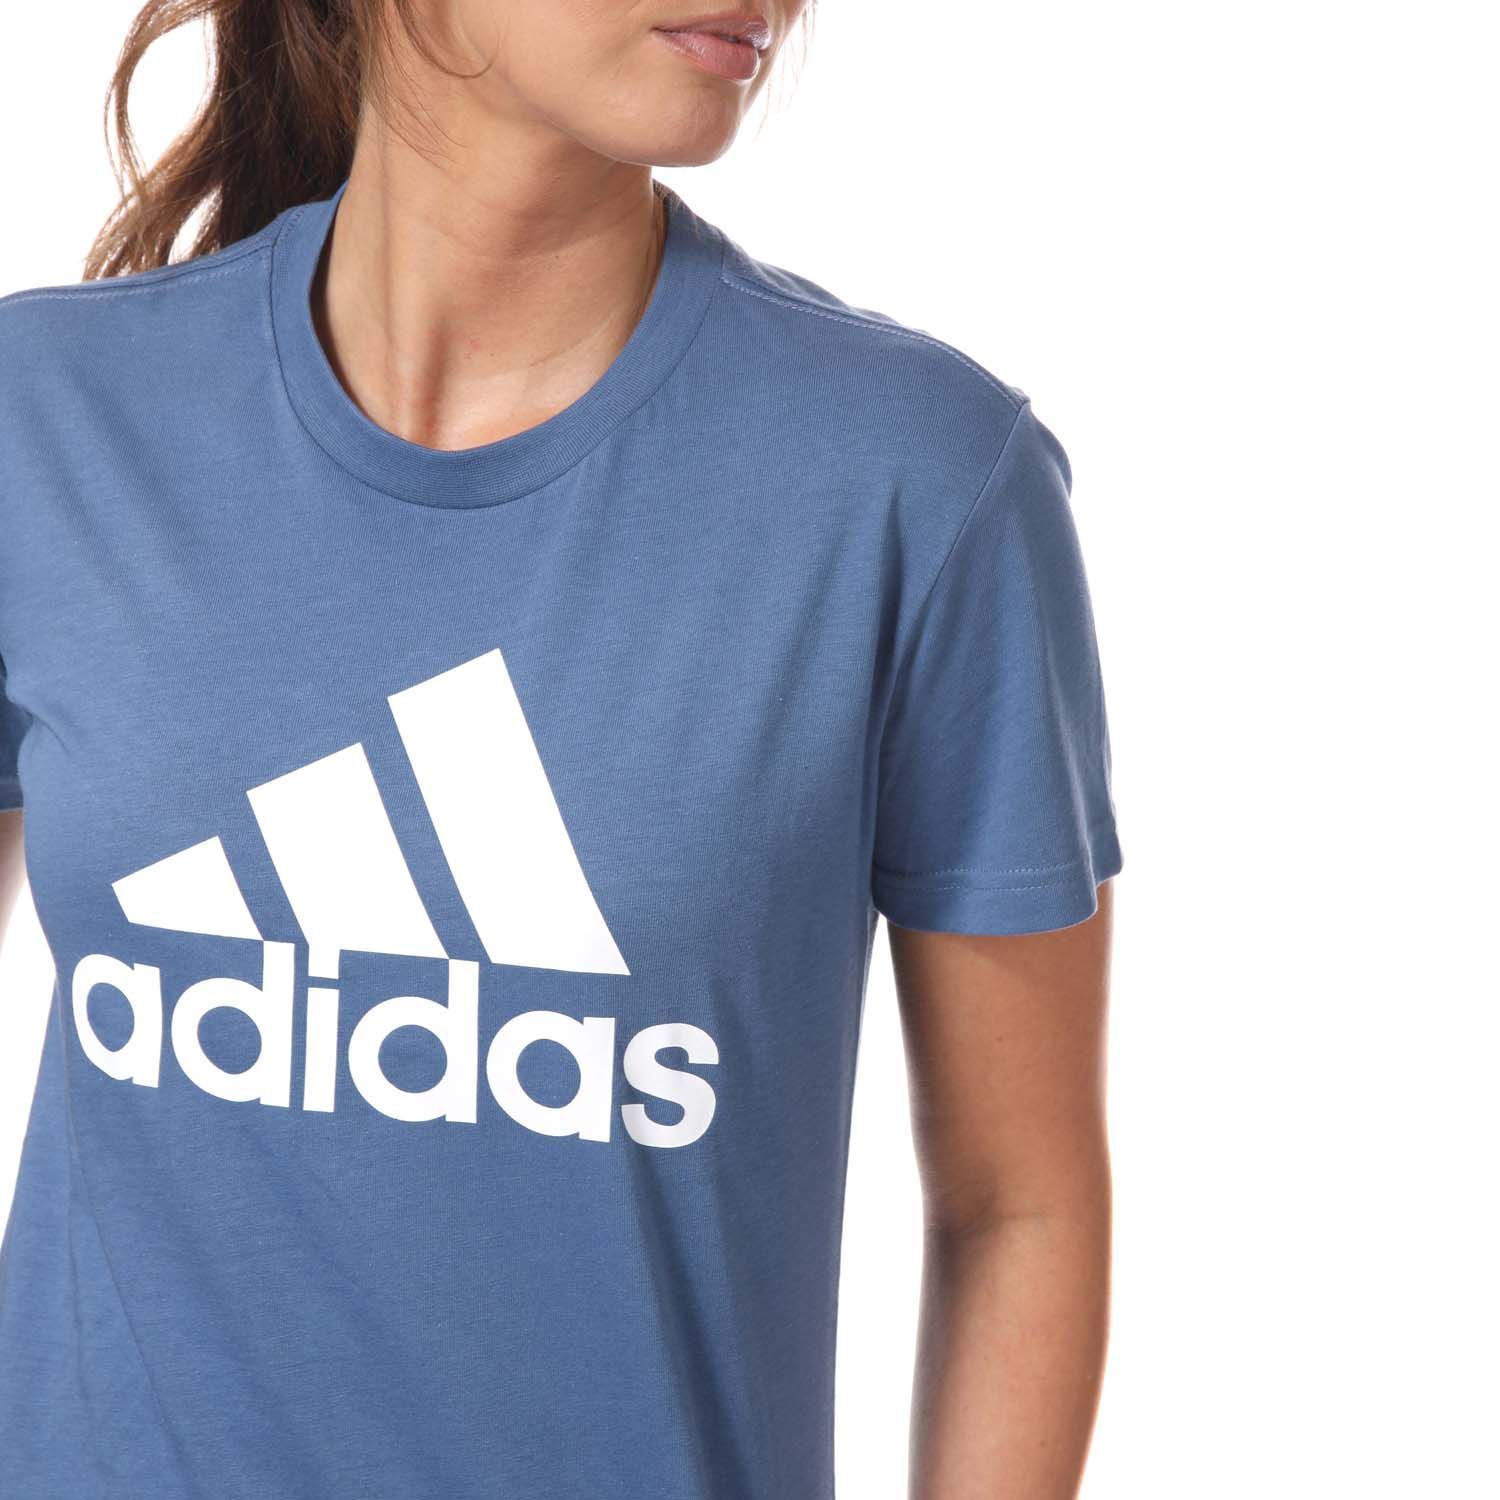 Womens adidas LOUNGEWEAR Essentials Logo T- Shirt in blue- white.- Crewneck.- Short sleeves.- Oversized adidas Badge of Sport logo across the chest.- Regular fit.- Main material: 100% Cotton. Machine washable. - Ref: GL0728